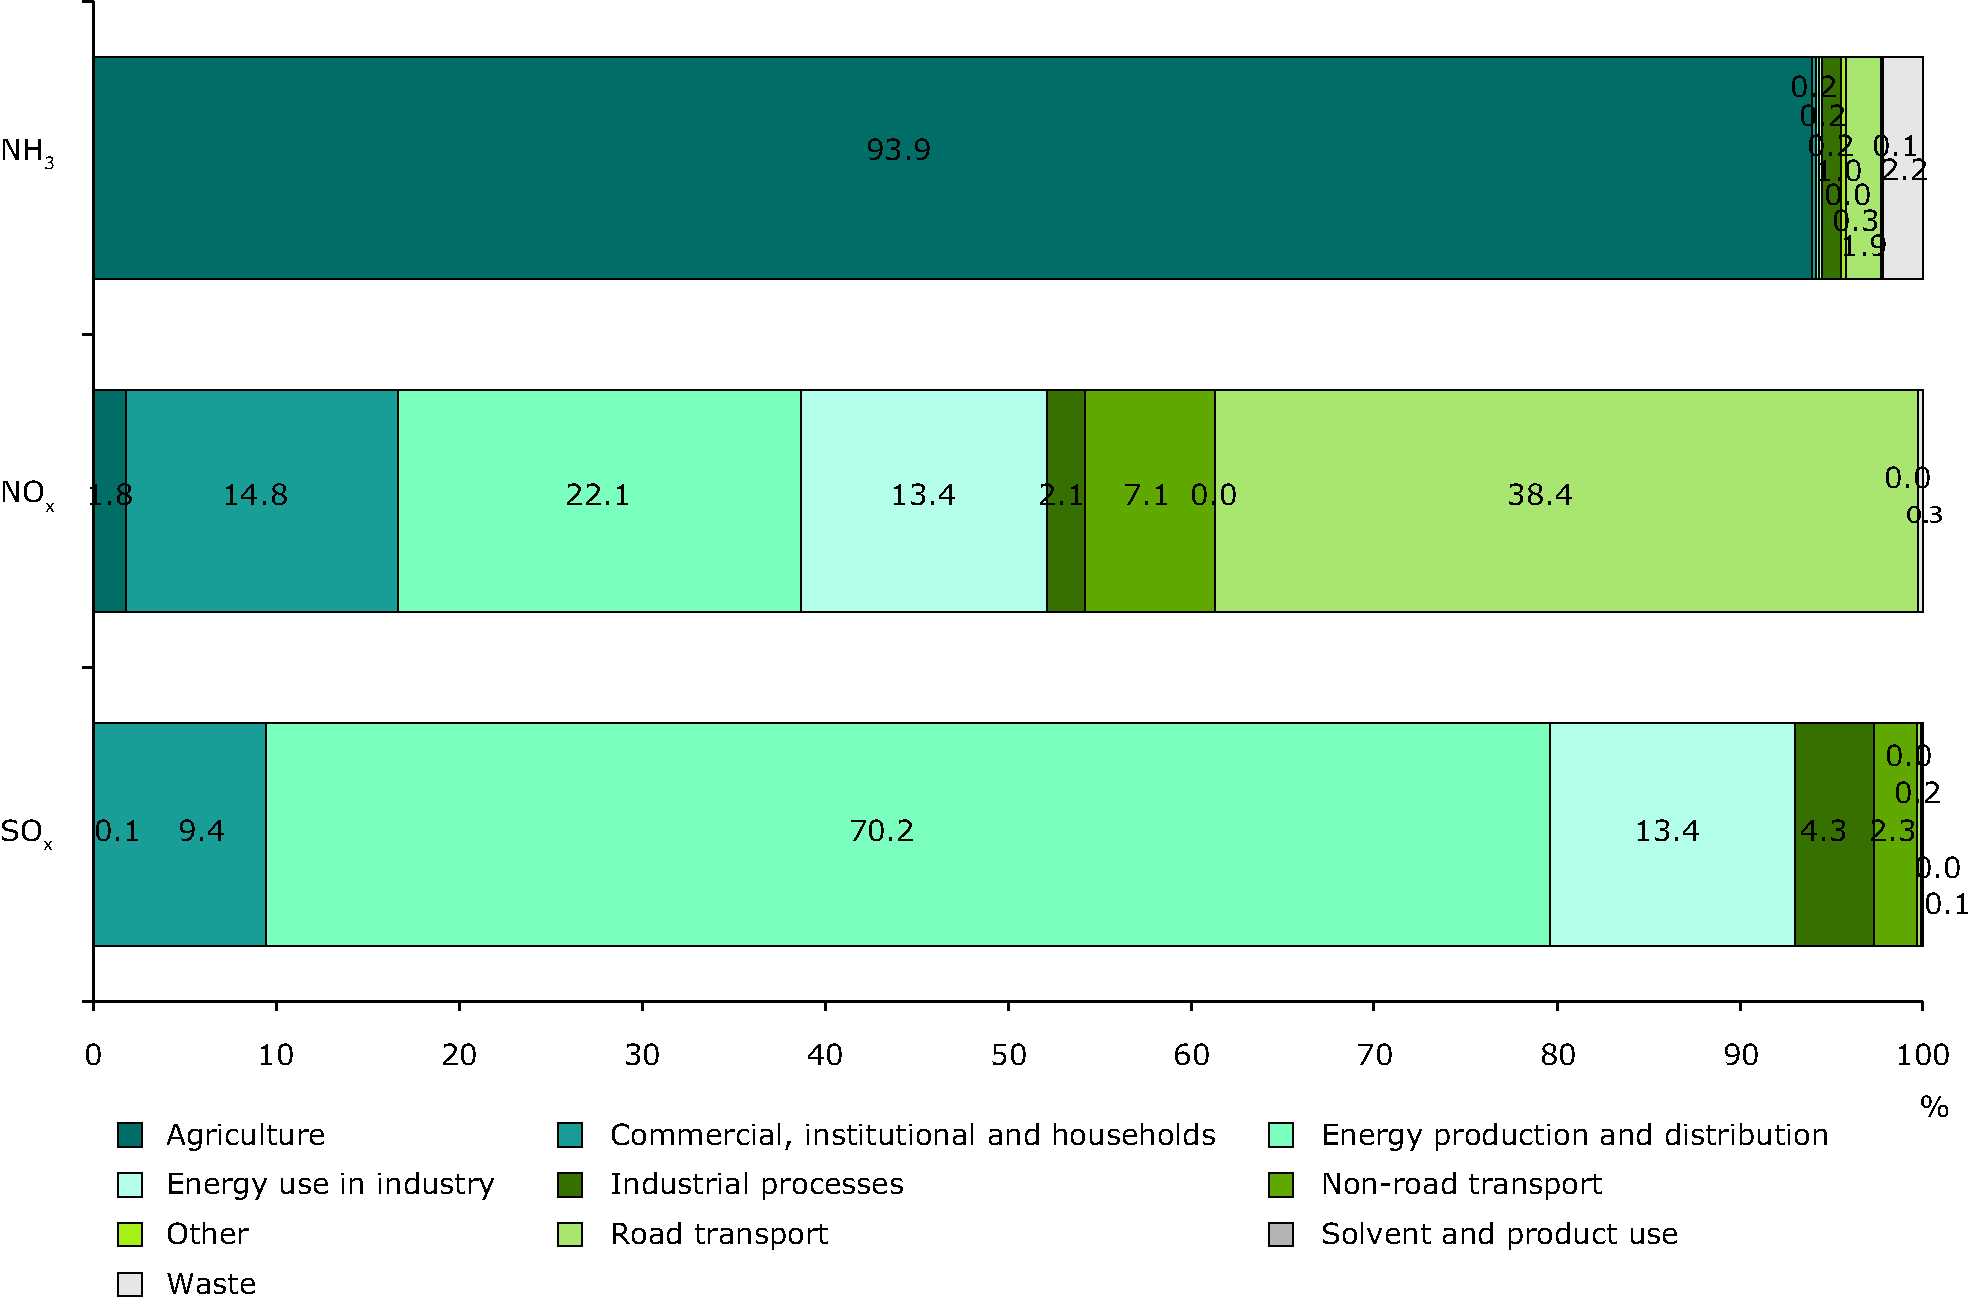 Contributions by sector for emissions of acidifying pollutants (EEA member countries)